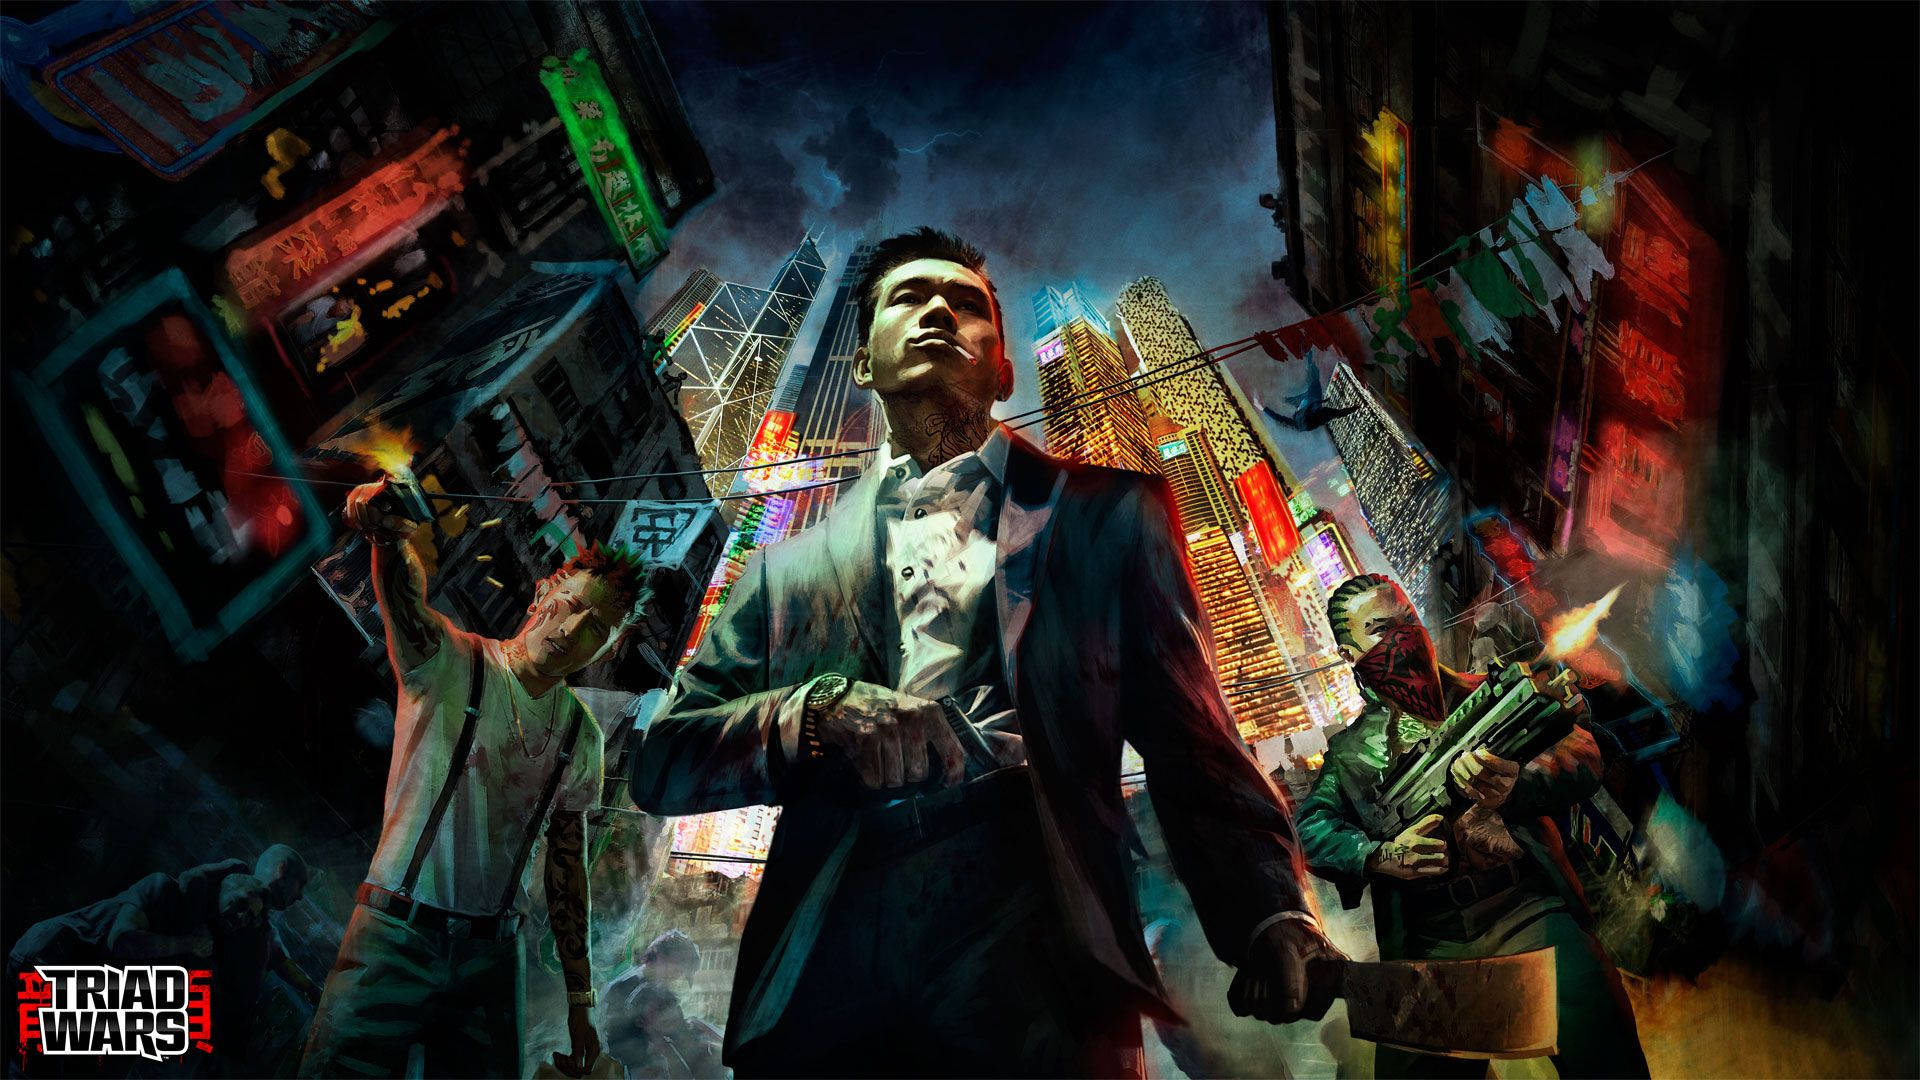 Step into an underground criminal world in Sleeping Dogs Wallpaper